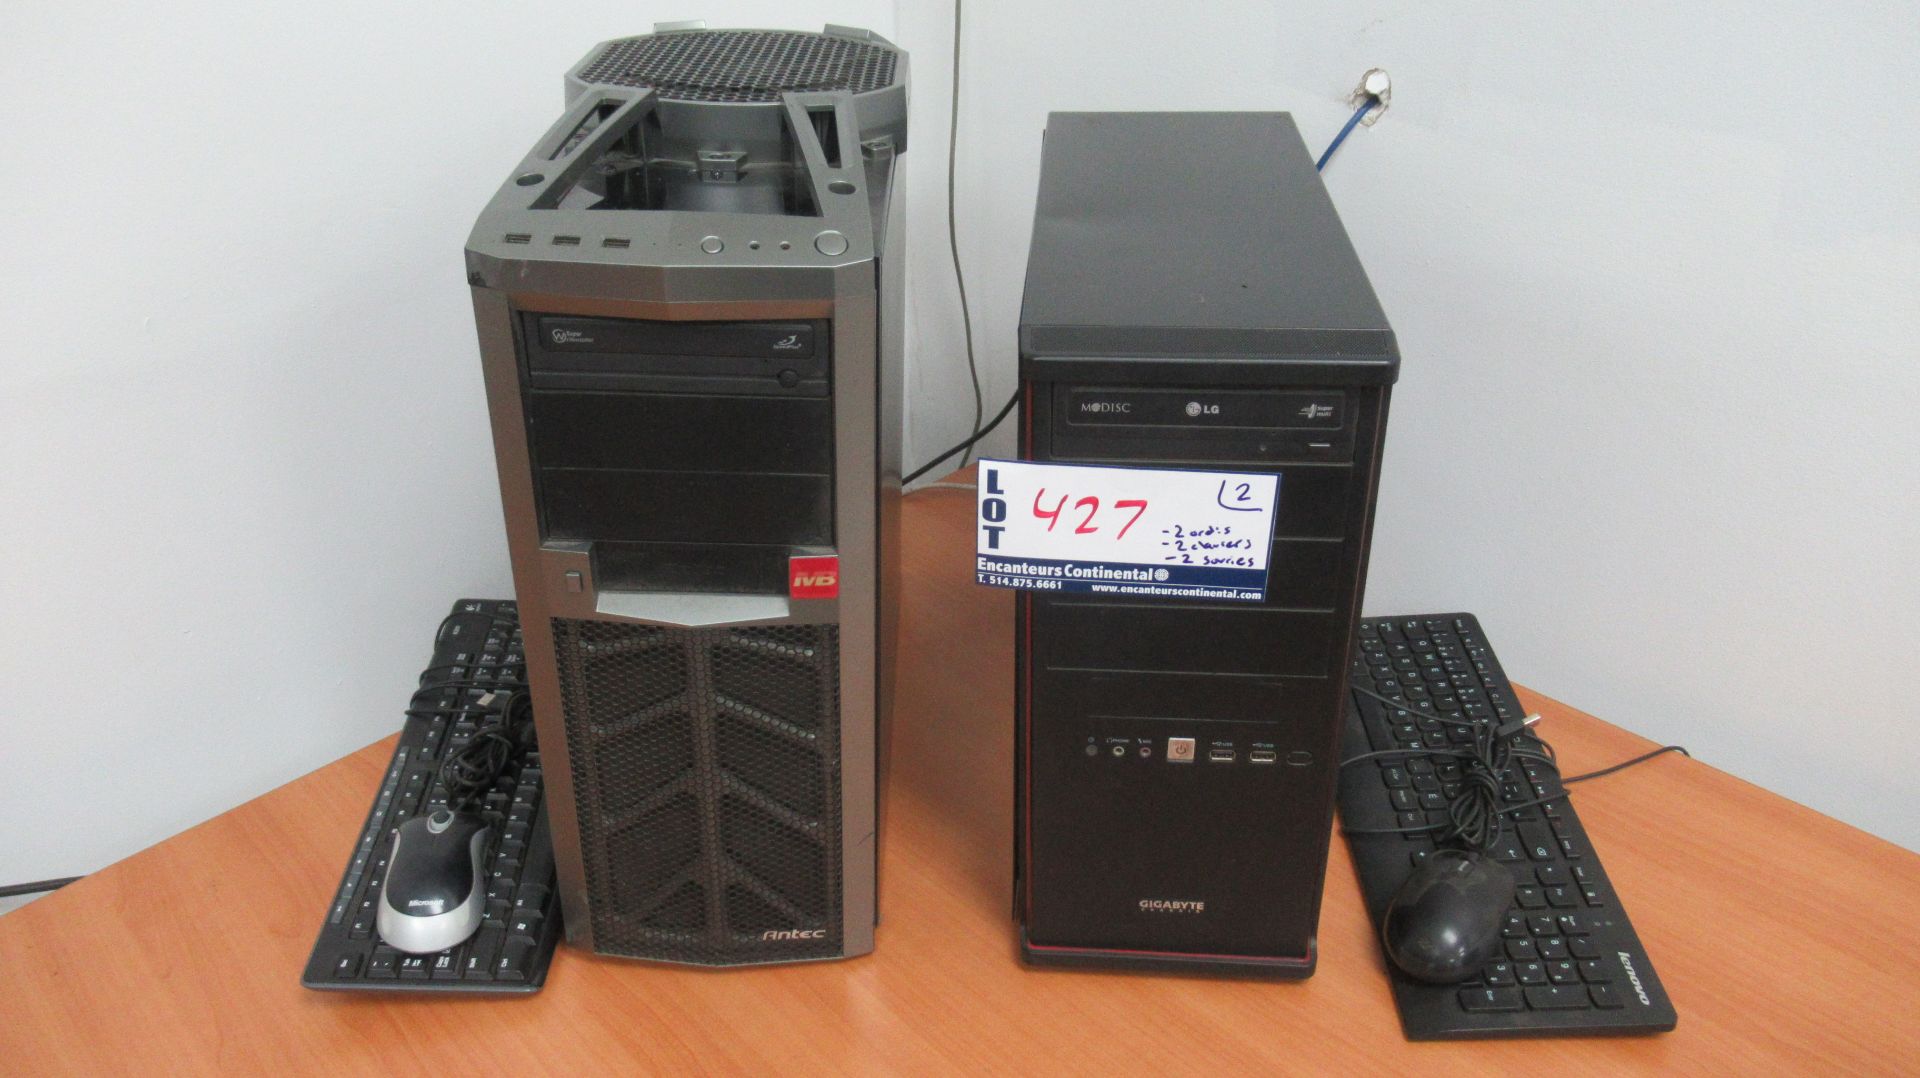 LOT DE 2 TOURS D'ODI AVEC 2 CLAVIERS & 2 SOURIS / COMPUTERS WITH KEYBOARD AND MICE